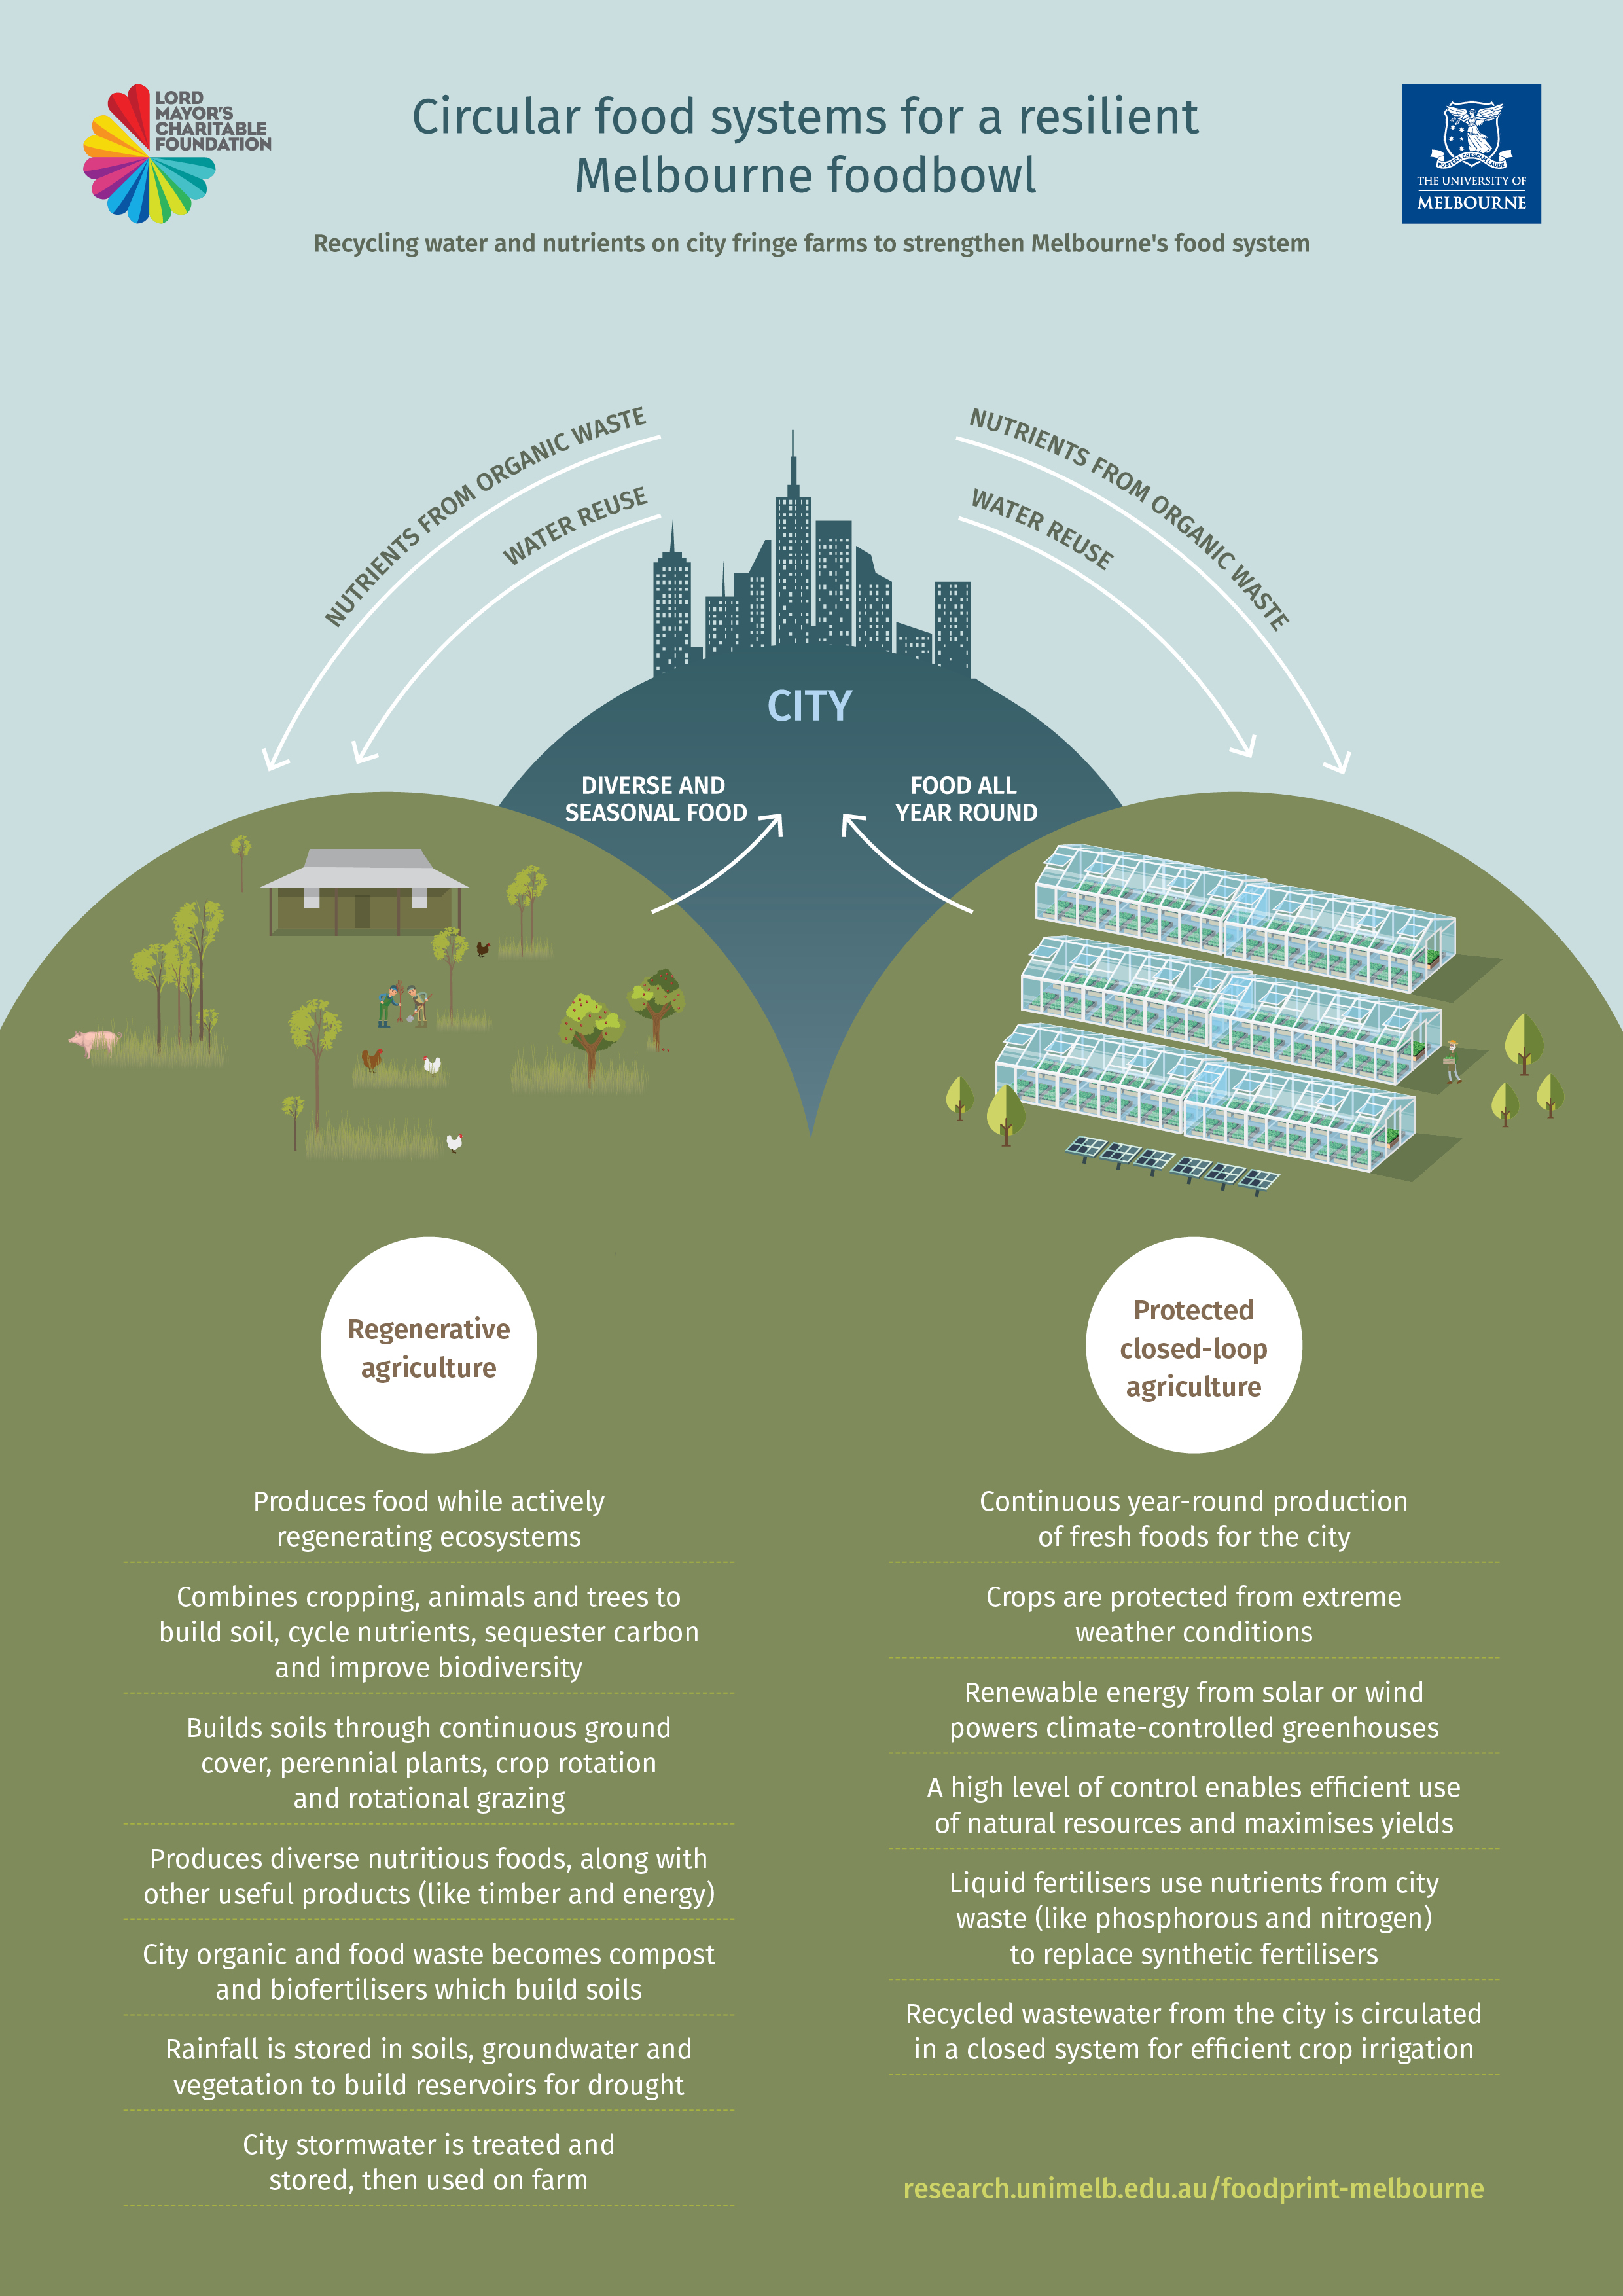 The image shows the city of Melbourne, and the cycle of nutrient and water streams out to two different types of farms - a regenerative farm and a protected closed-loop farm. 